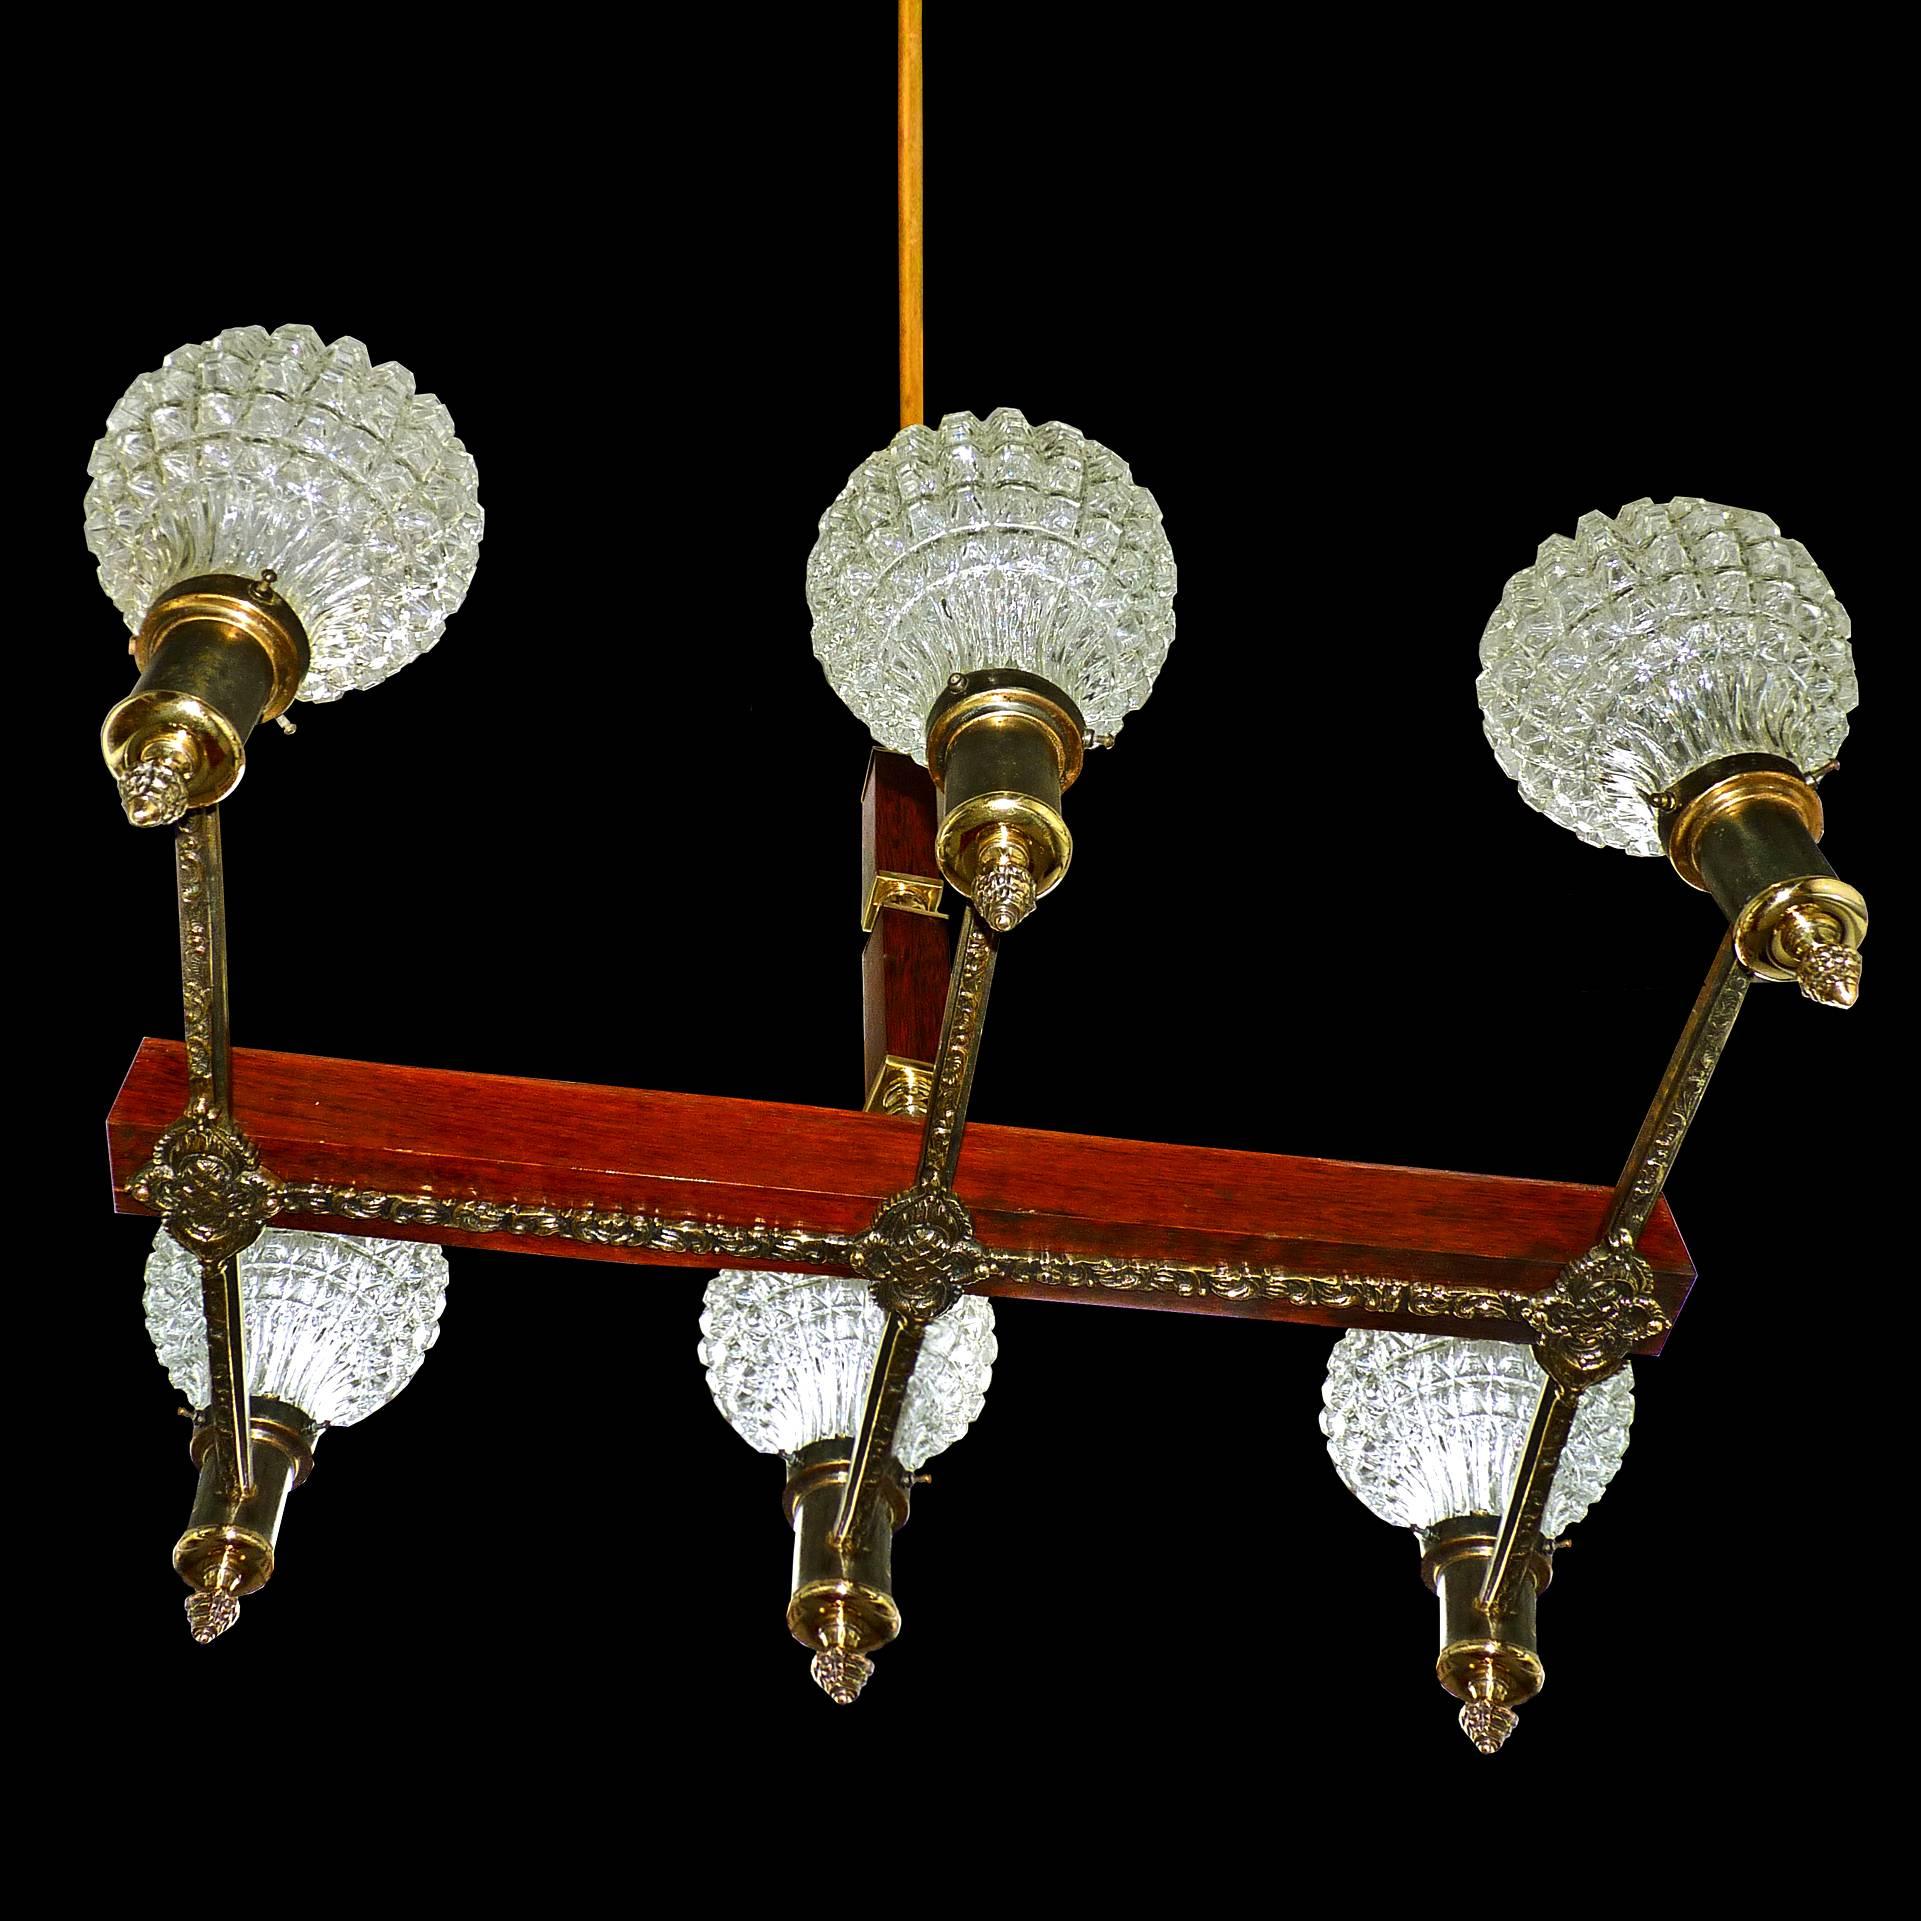 Large Modernist French Art Deco Bronze Wood Brass Six-Light Ice Glass Chandelier For Sale 1